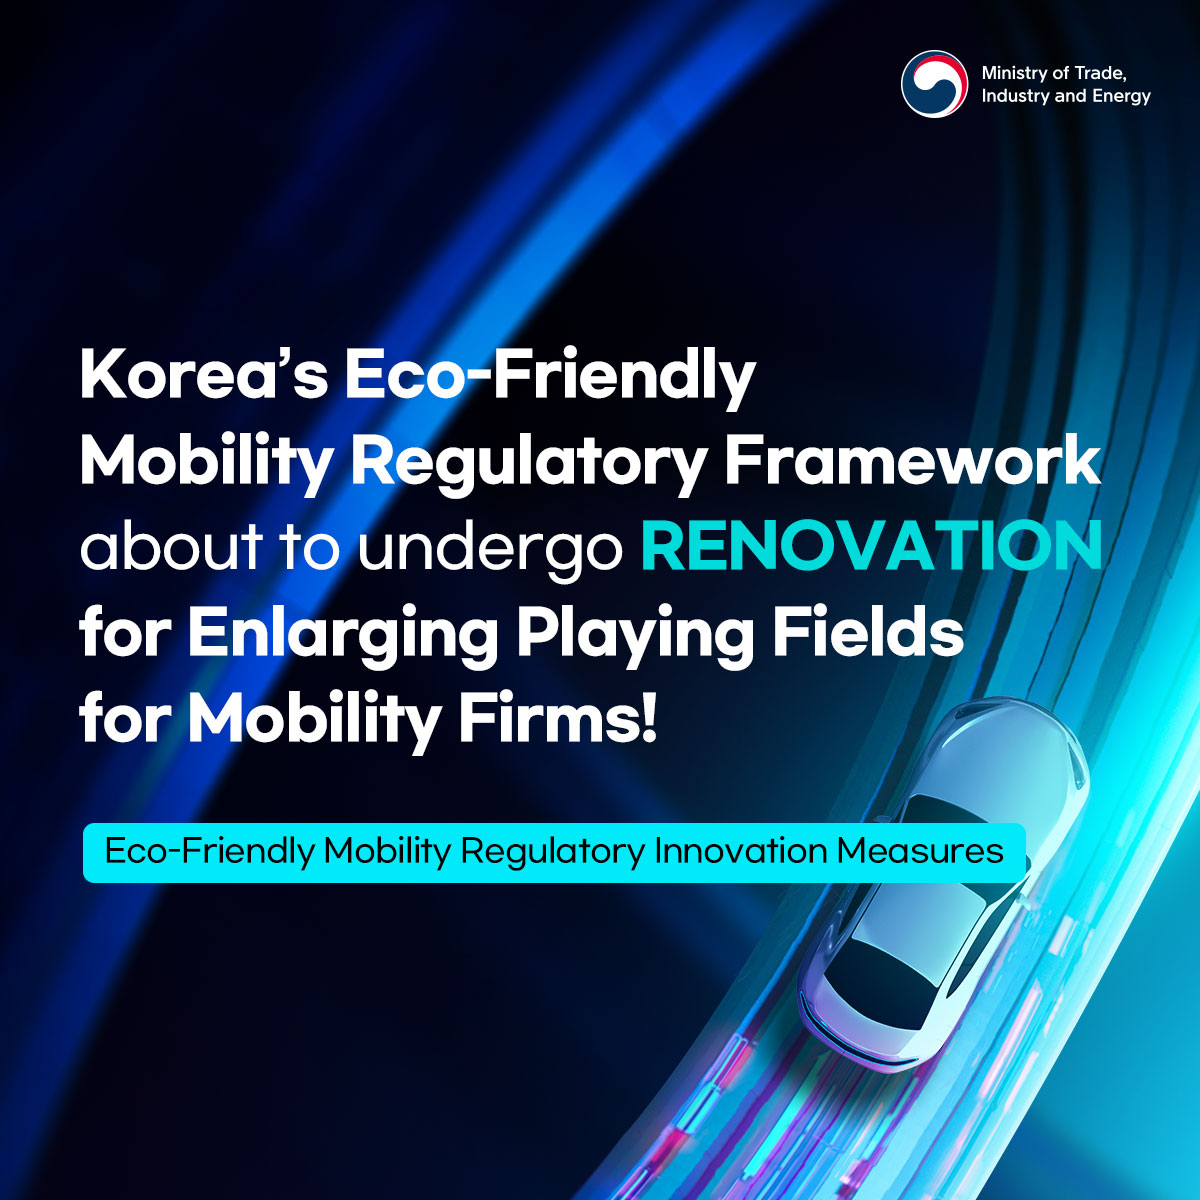 Ministry of Trade, Industry and Energy
Korea's Eco-Friendly Mobility Regulatory Framework about to undergo RENOVATION for Enlarging Playing Fields for Mobility Firms!
Eco-Friendly Mobility Regulatory Innovation Measures